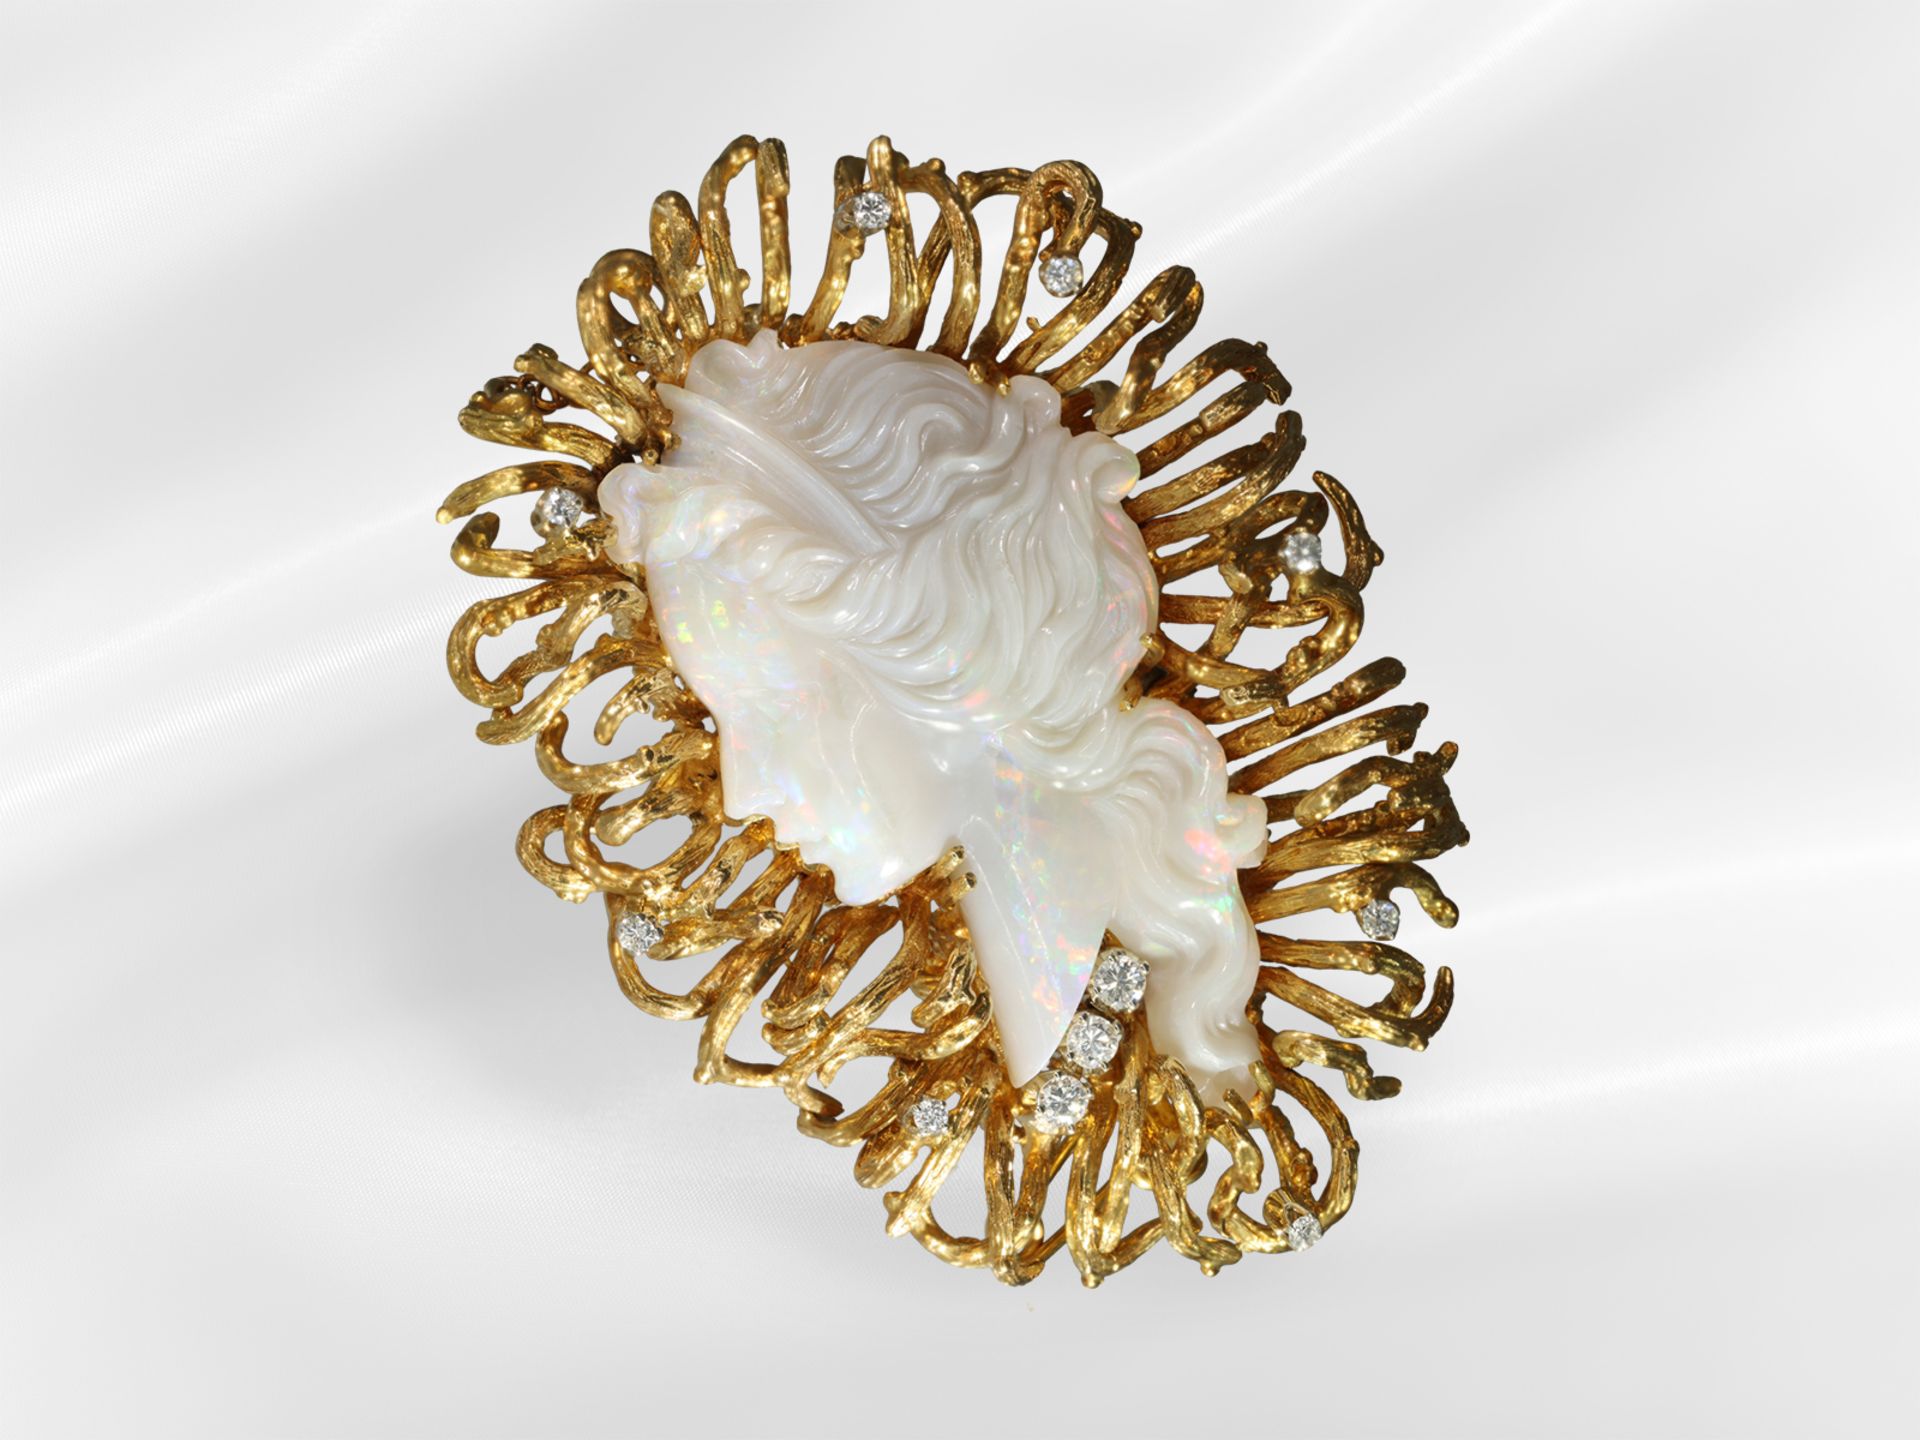 Brooch/pendant: unusual vintage goldsmith work with opal cameo, possibly Andrew Grima - Image 3 of 6